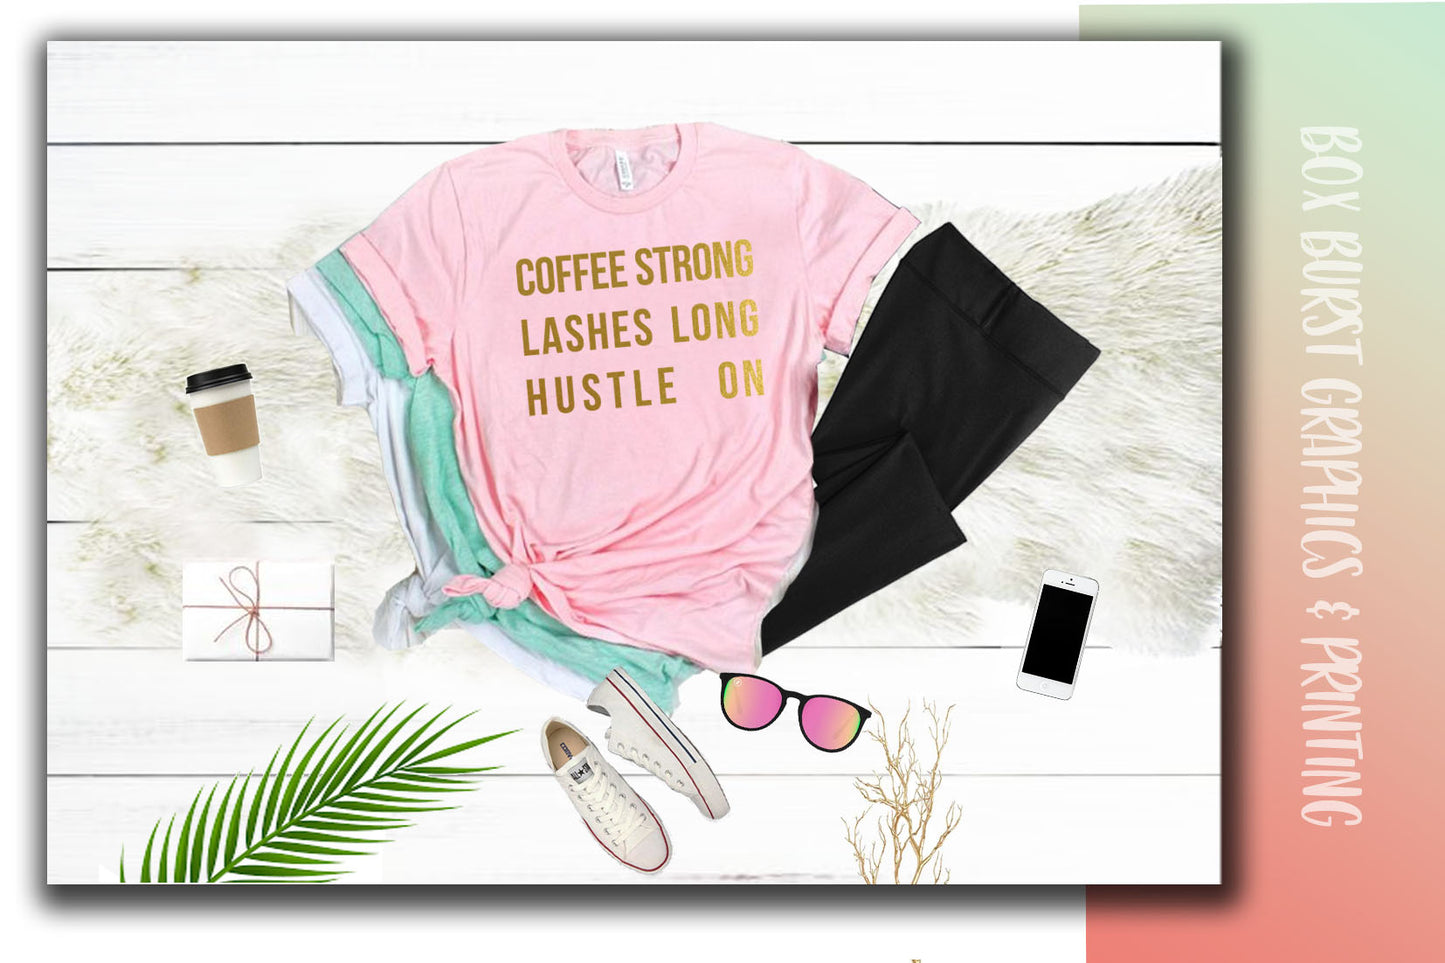 Coffee Strong Lashes long HUSTLE ON unisex tee